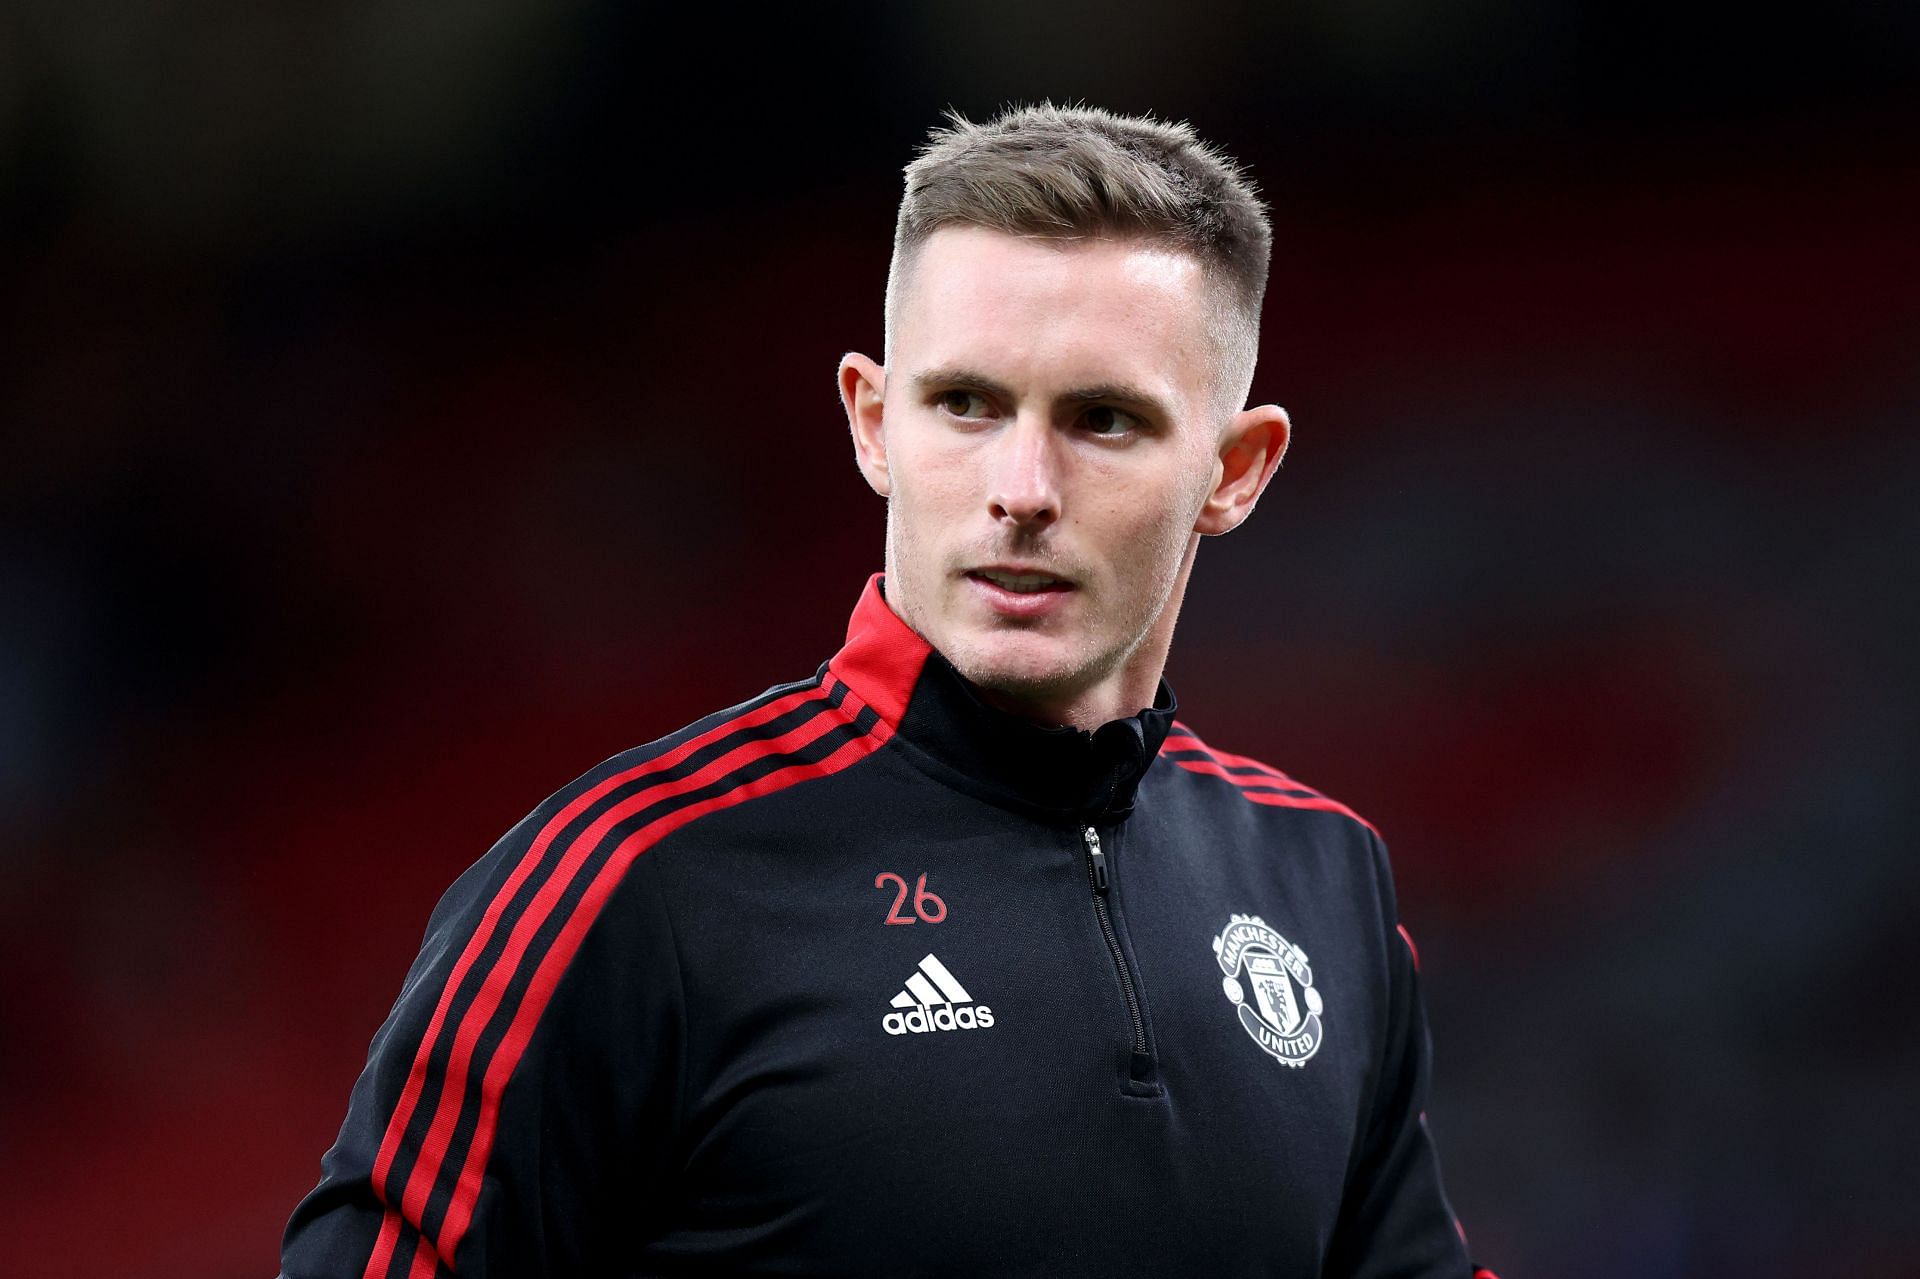 Kevin Phillips believes Manchester United should let Dean Henderson leave in search of regular football.